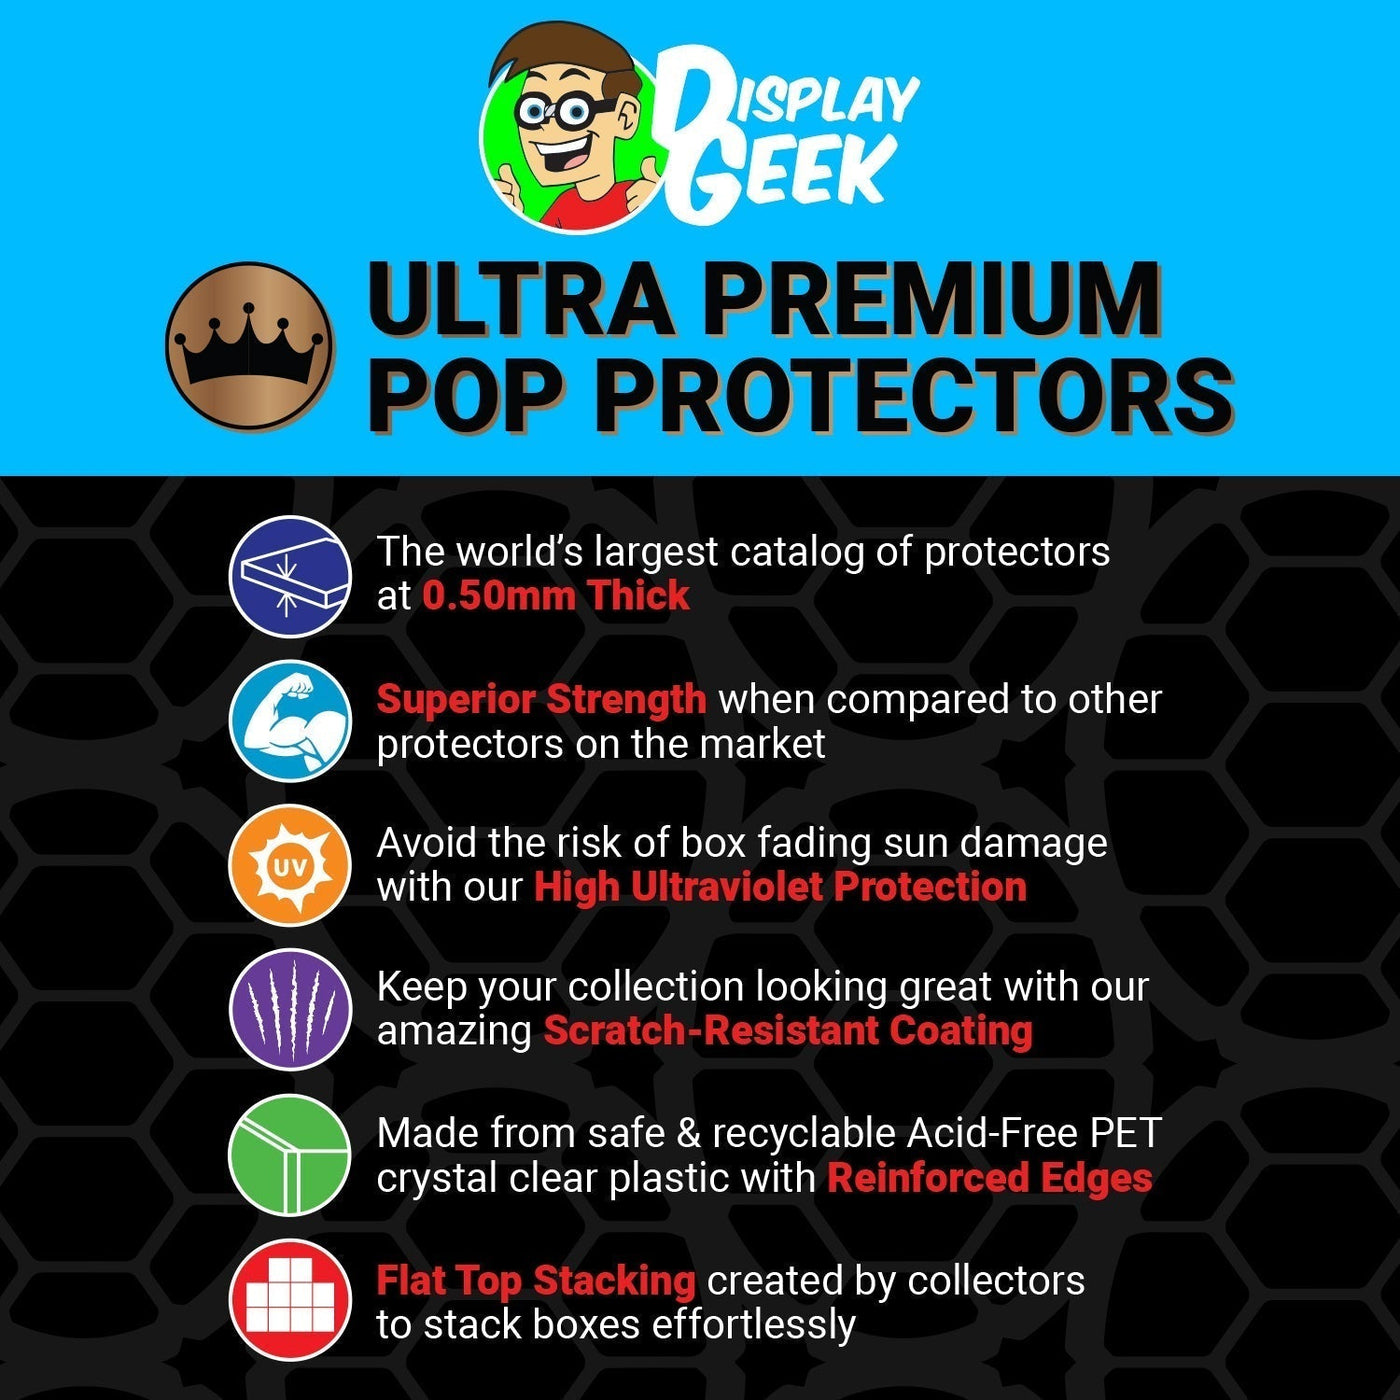 Pop Protector for Alice at the Mad Tea Party #54 Funko Pop Rides on The Protector Guide App by Display Geek